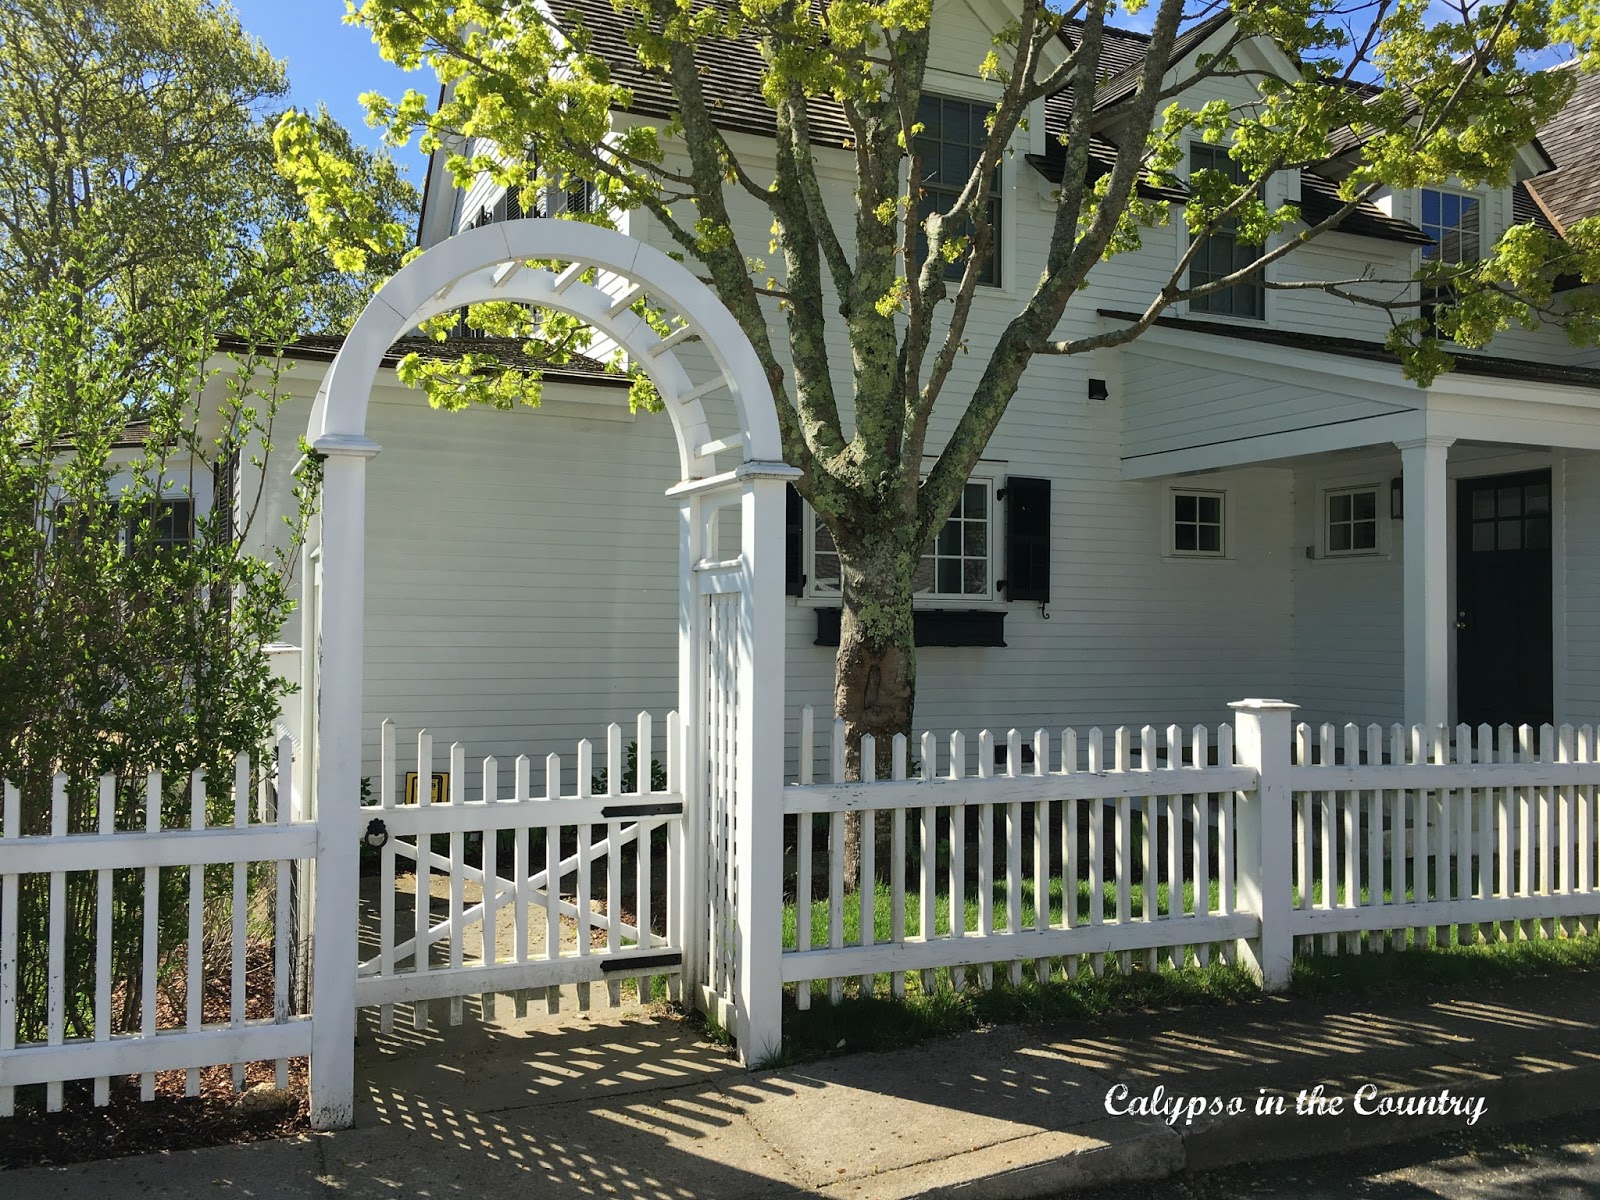 Beautiful archway and fence in Martha's Vineyard